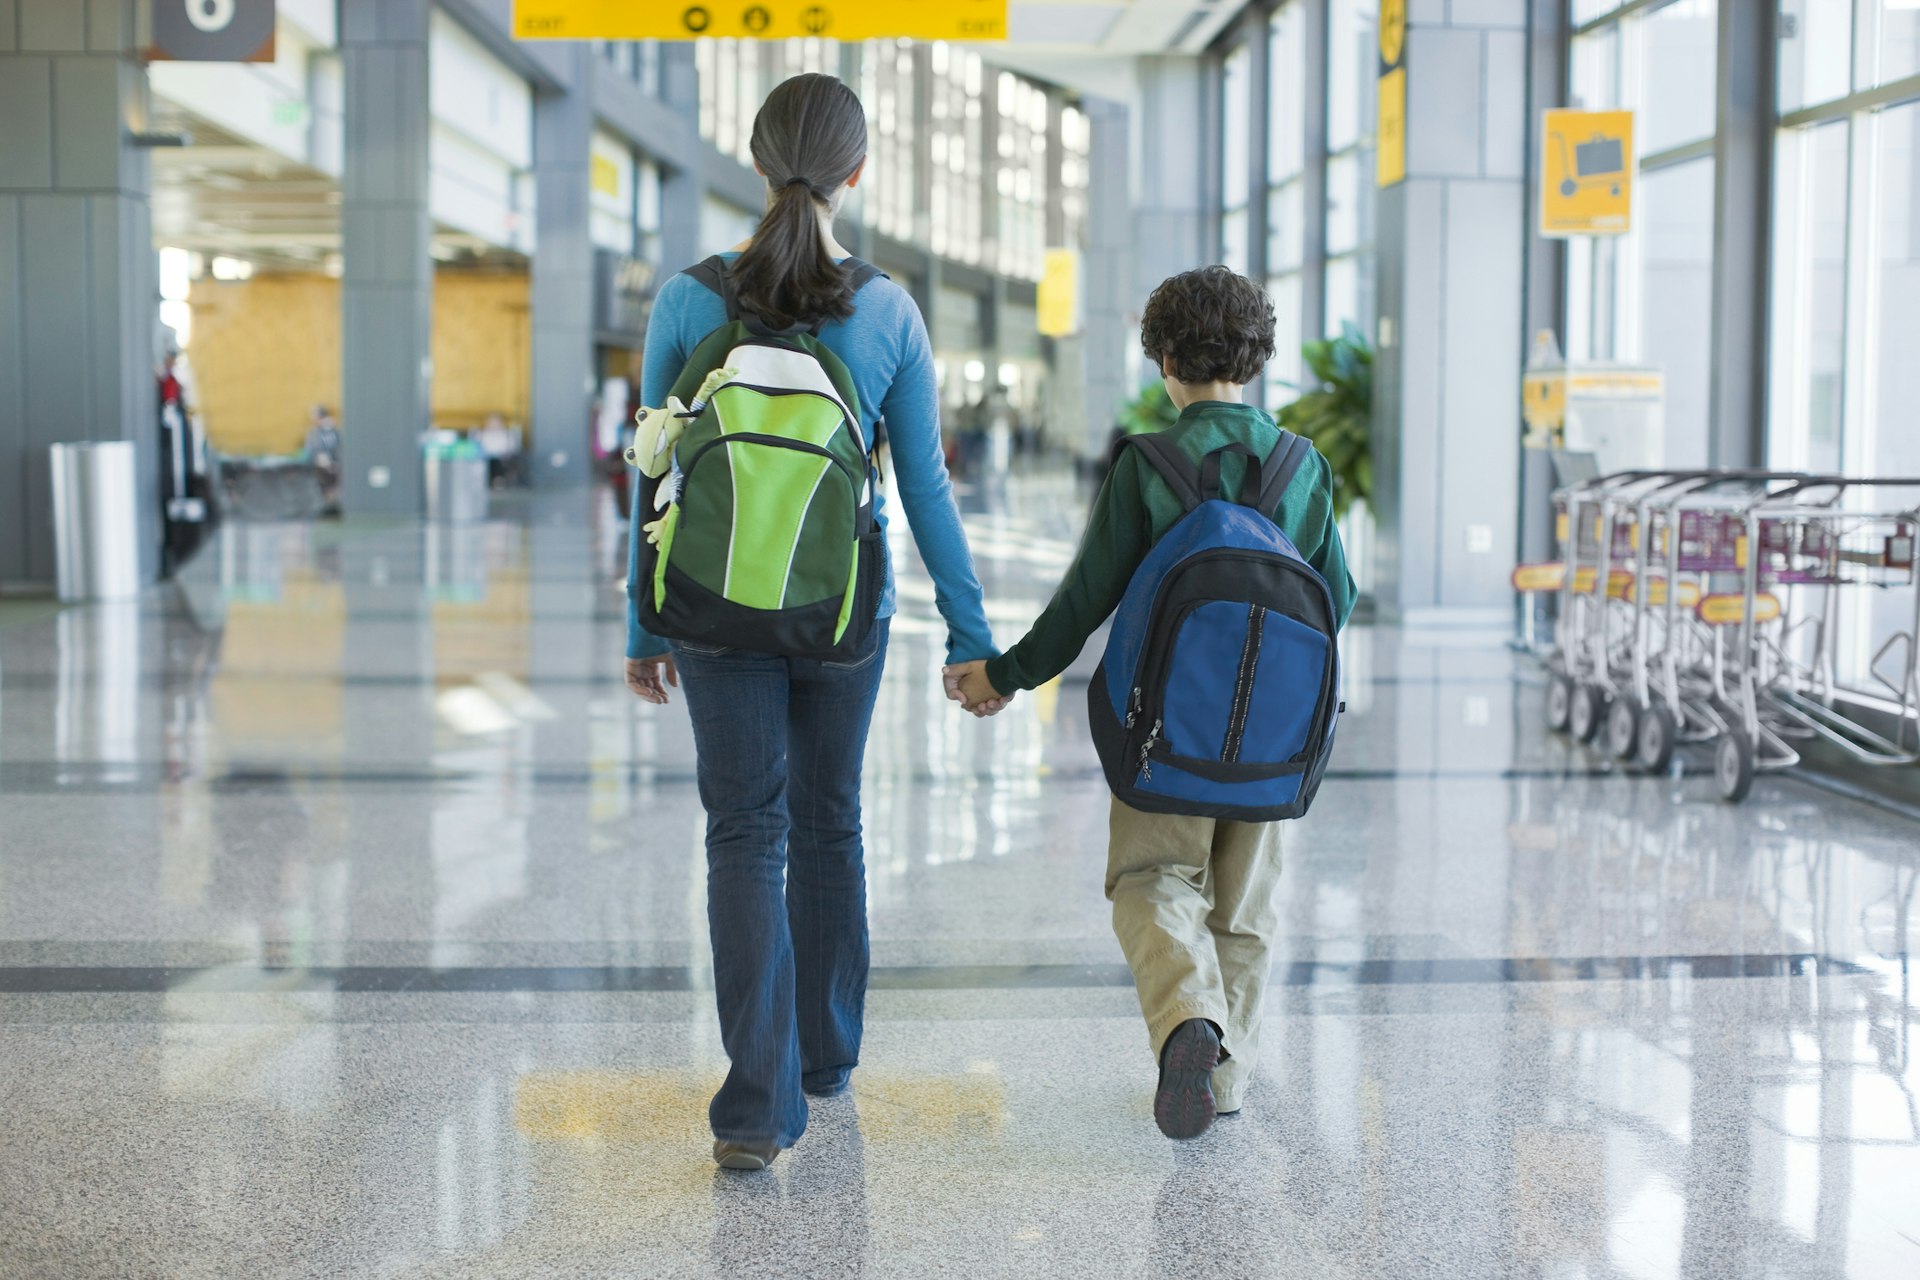 A mother and son walking through the airport terminal in Austin, Texas